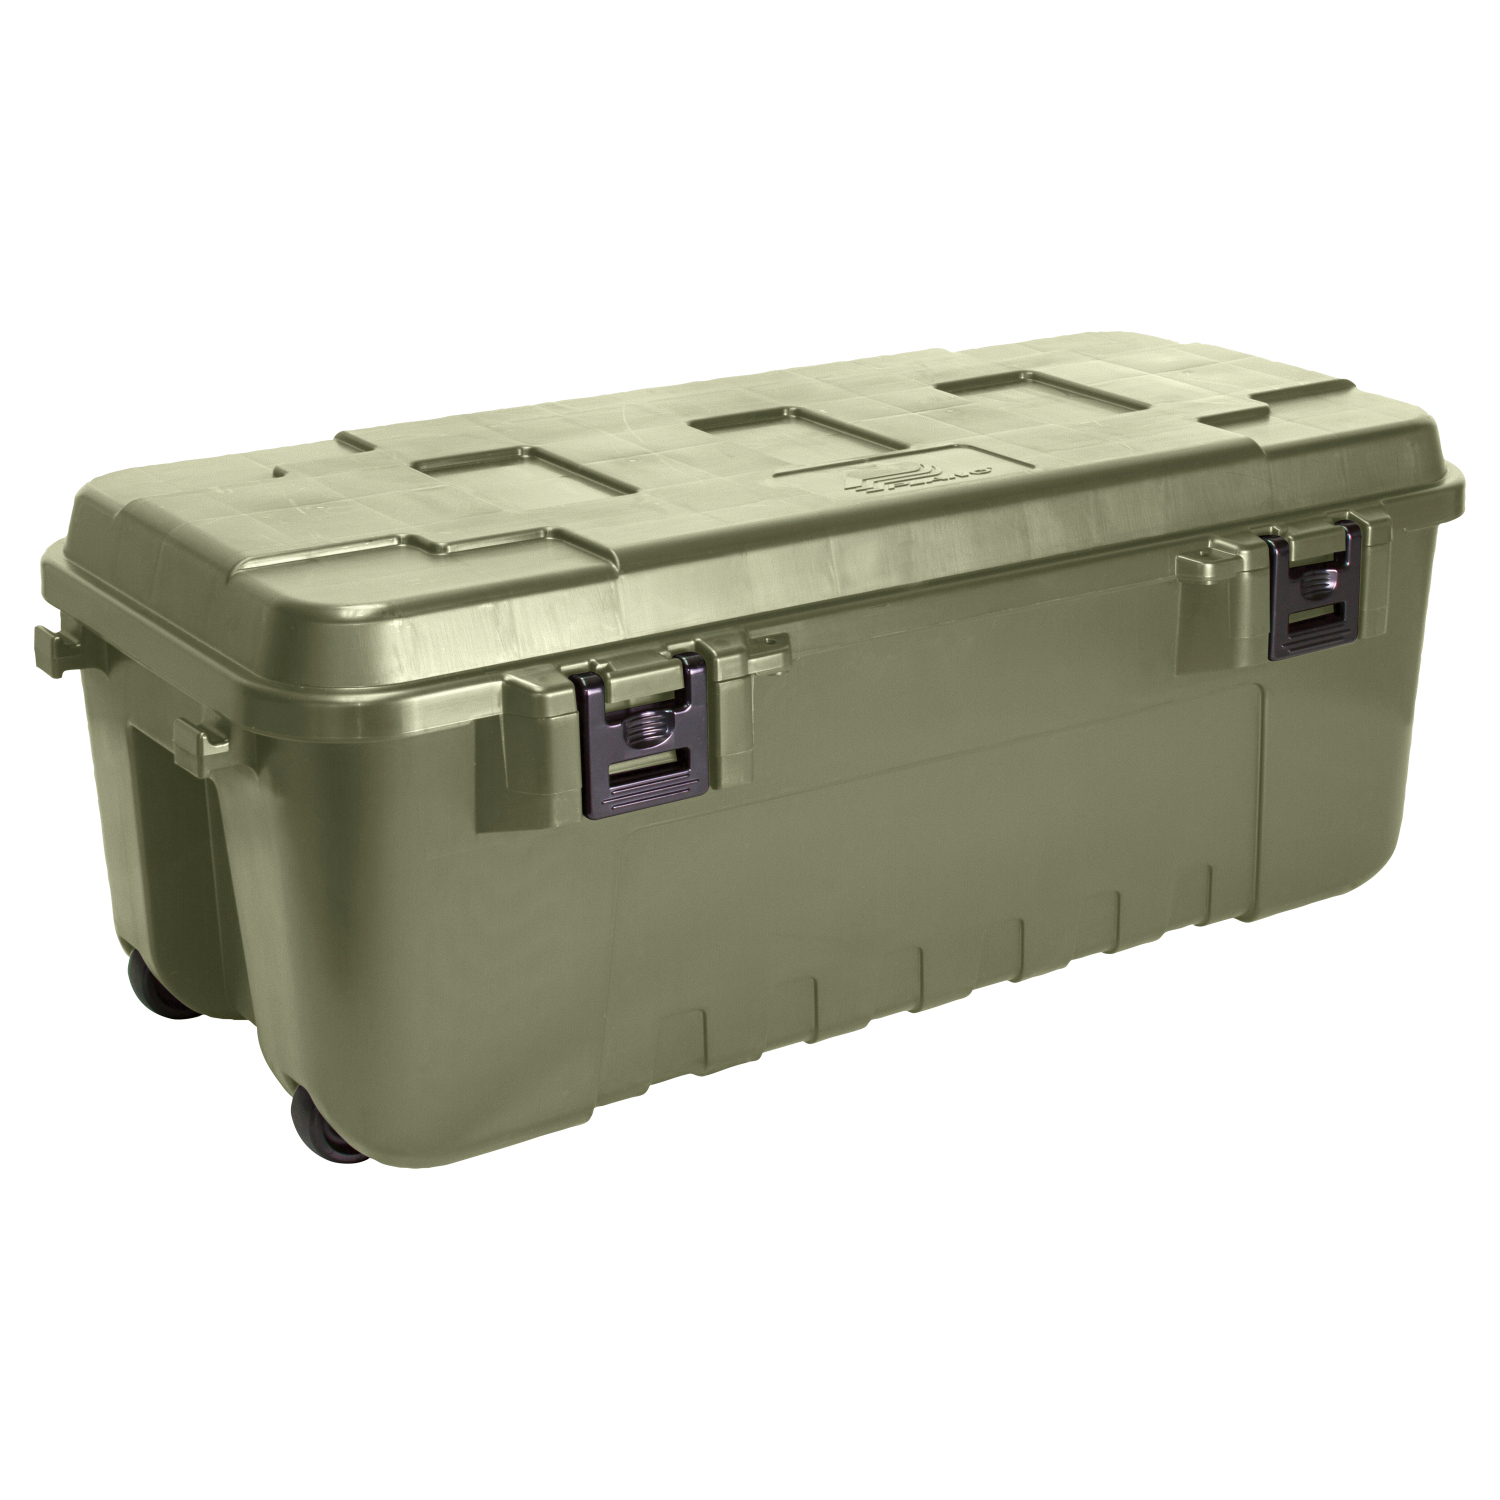 Plano Transport box Sportsmans Trunks Large at low prices